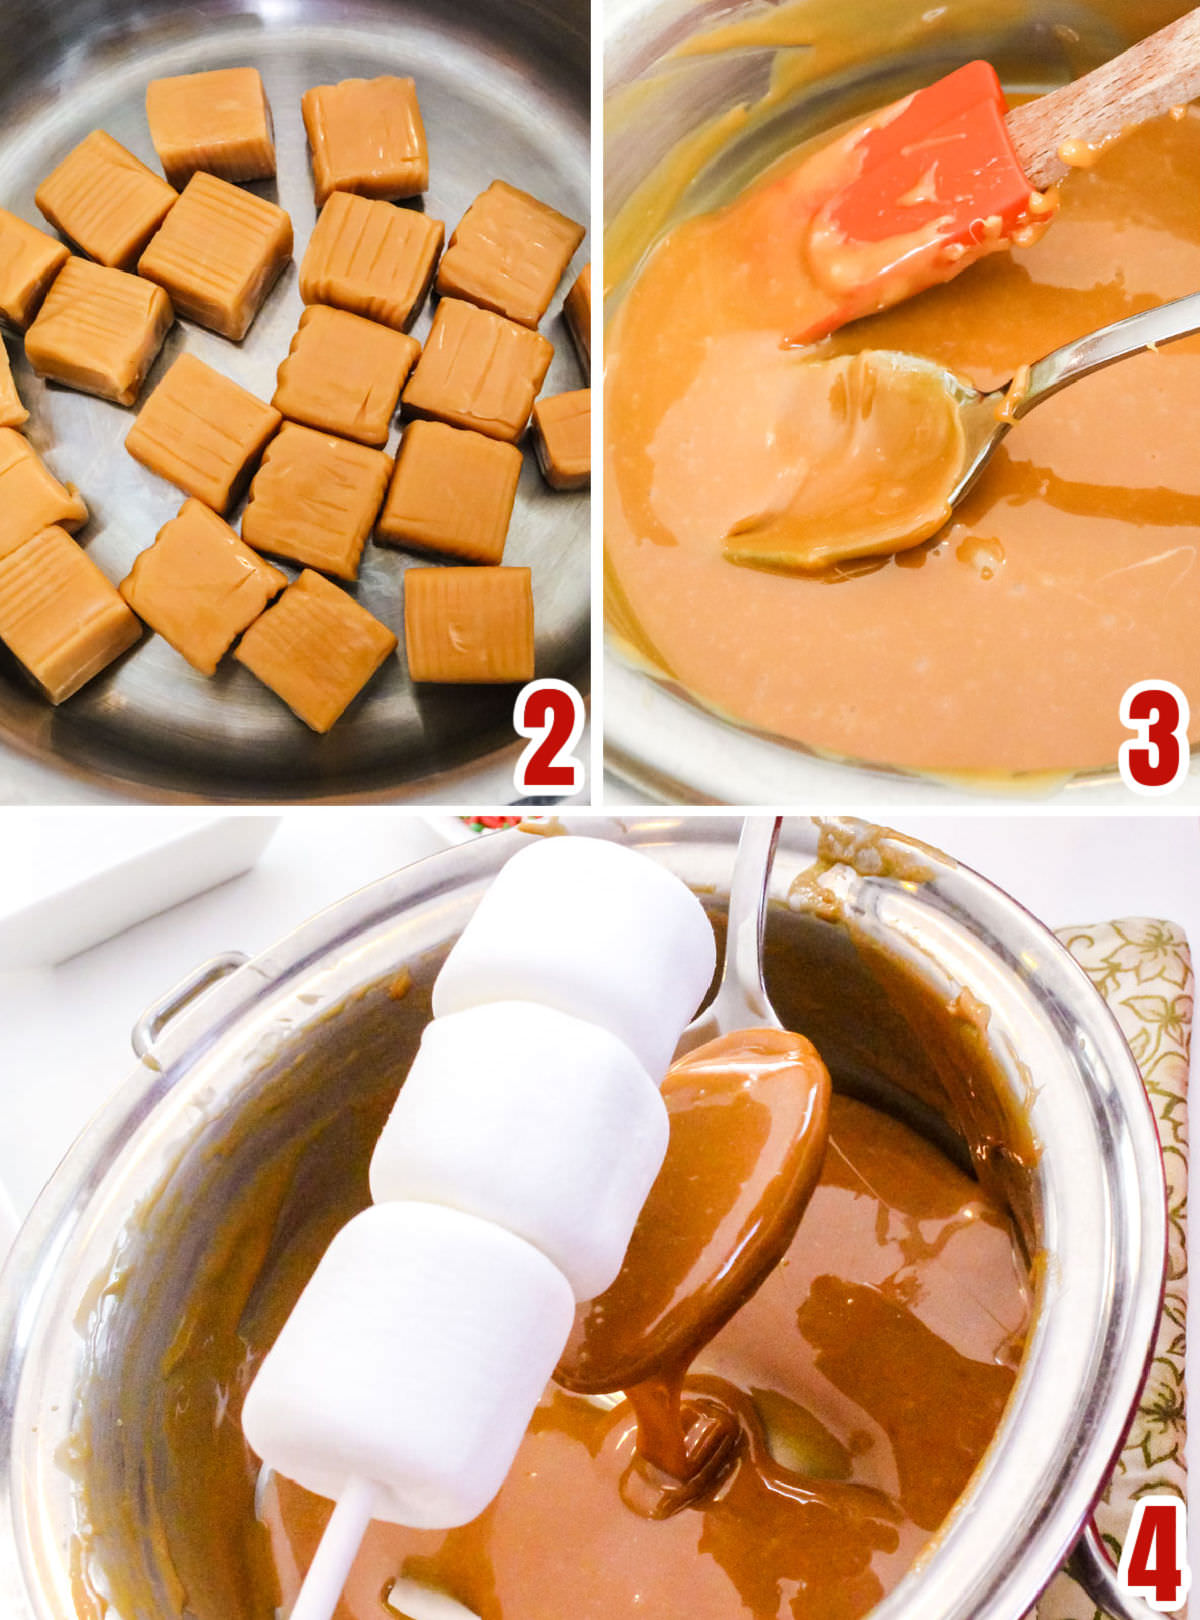 Collage image showing the steps for covering the marshmallow pop with melted caramel.